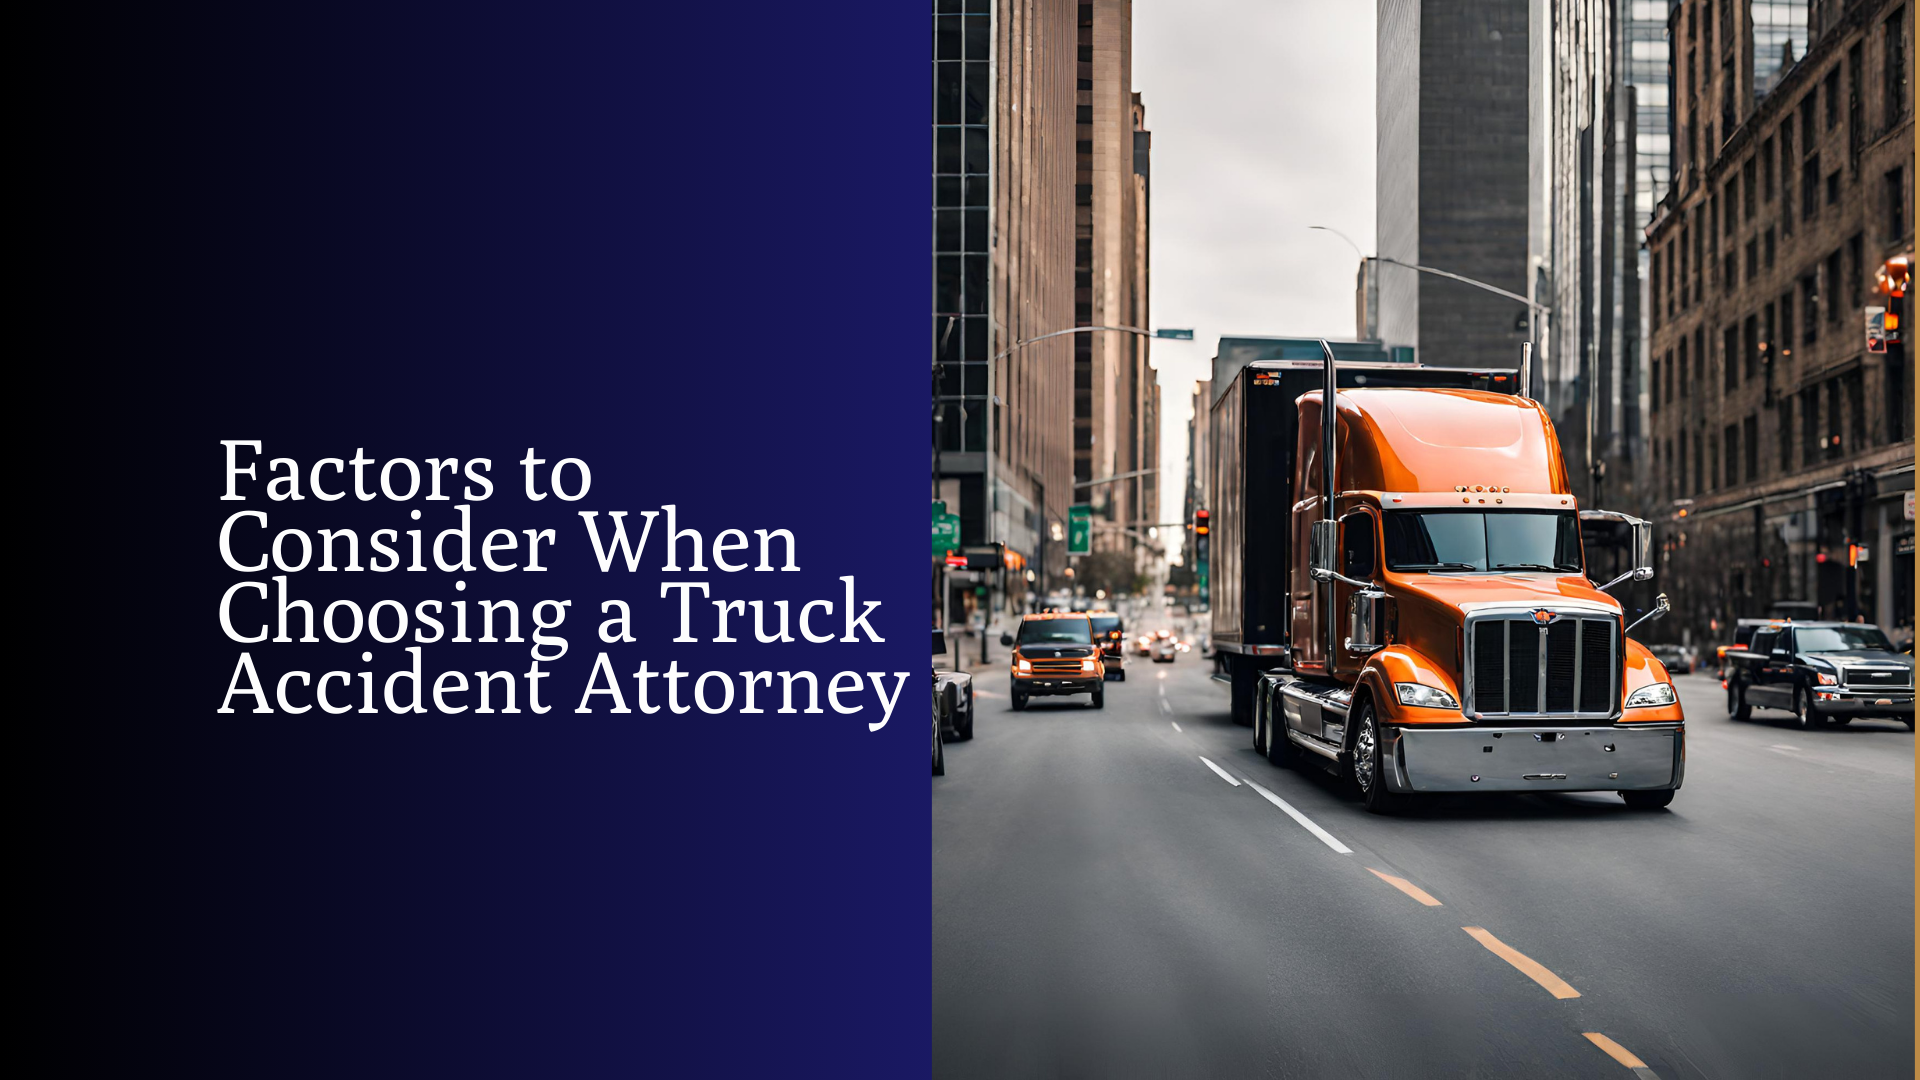 Factors-to-Consider-When-Choosing-a-Truck-Accident-Attorney